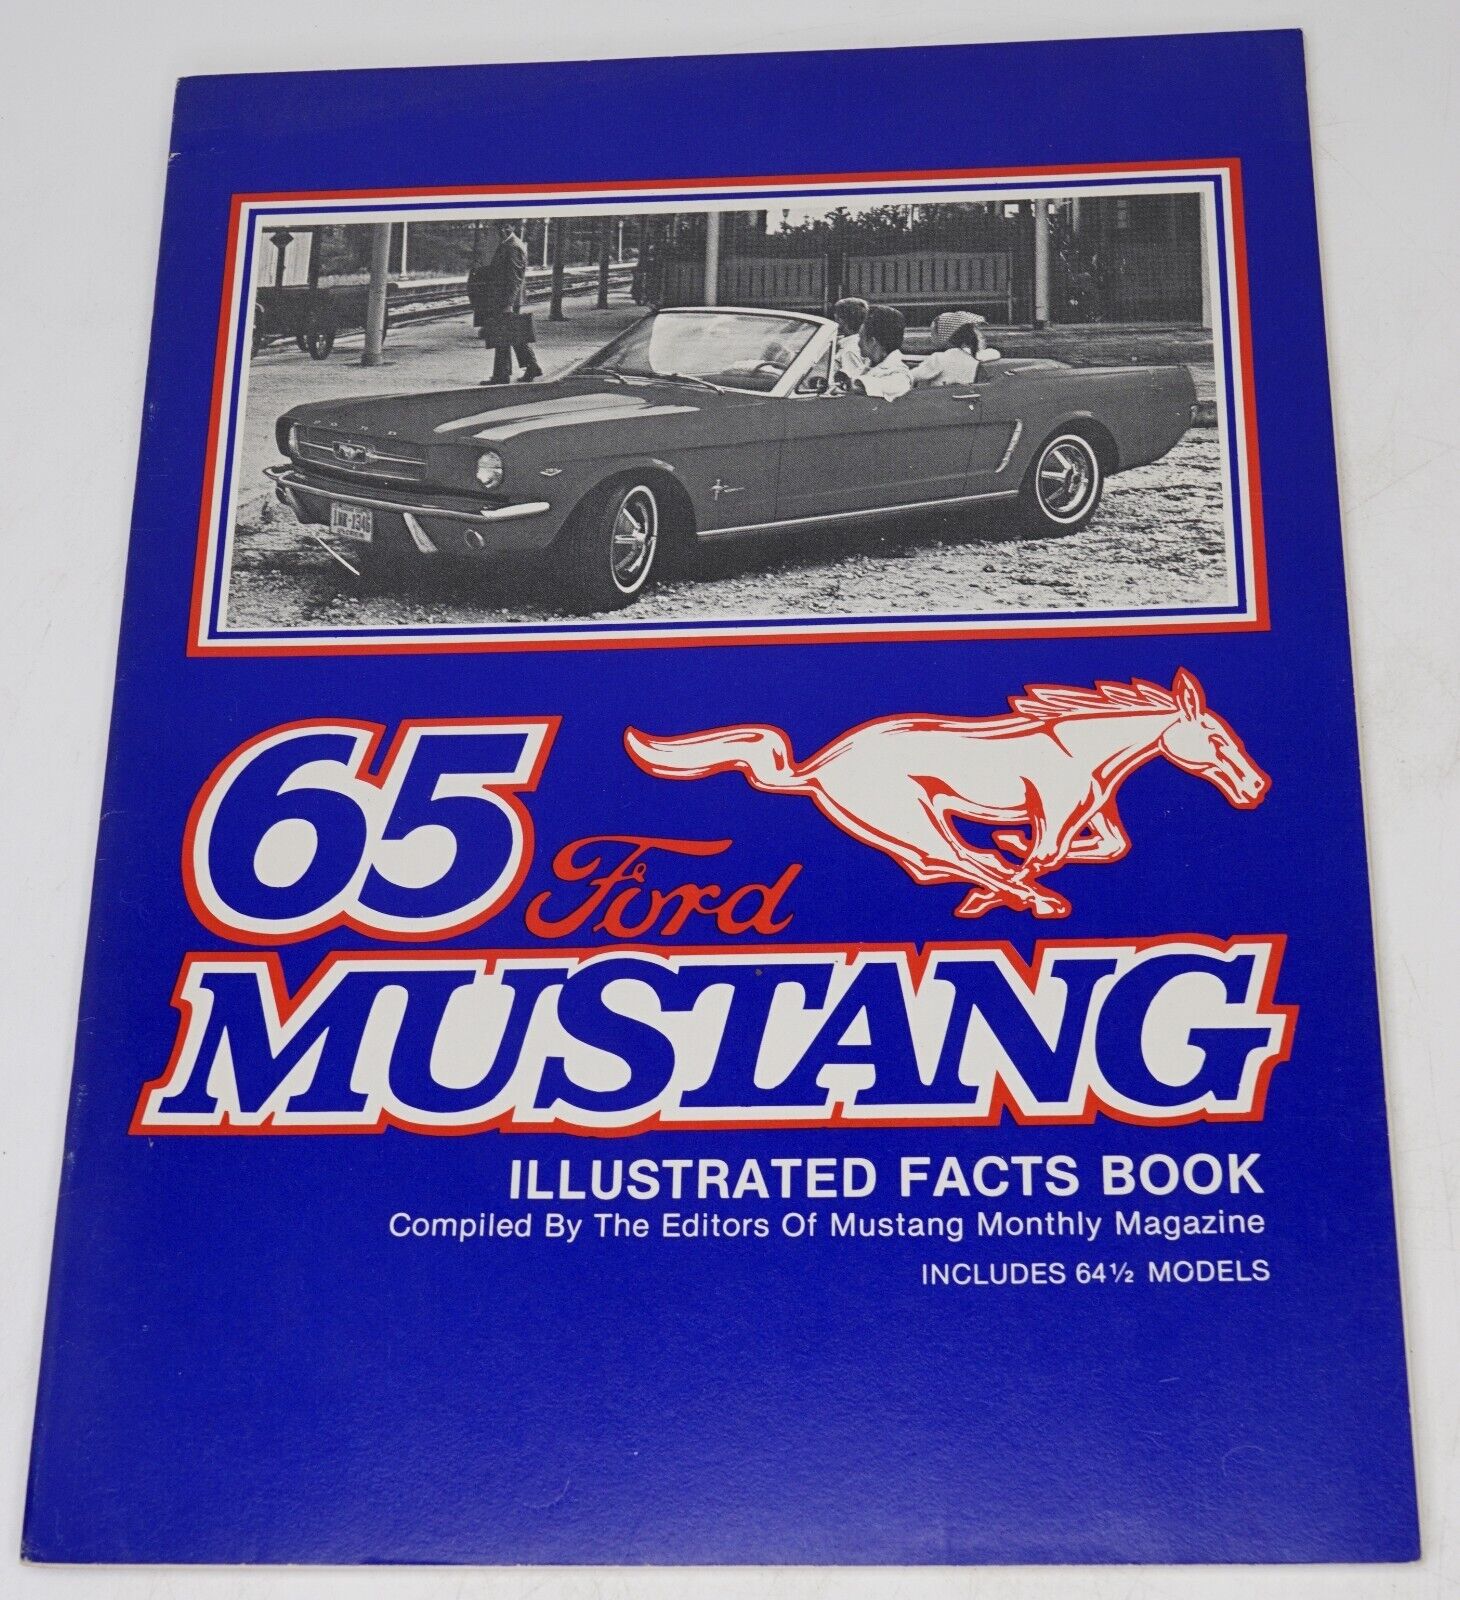 65 Ford Mustang Illustrated Facts Book by Mustang Monthly Magazine 1964½ Models